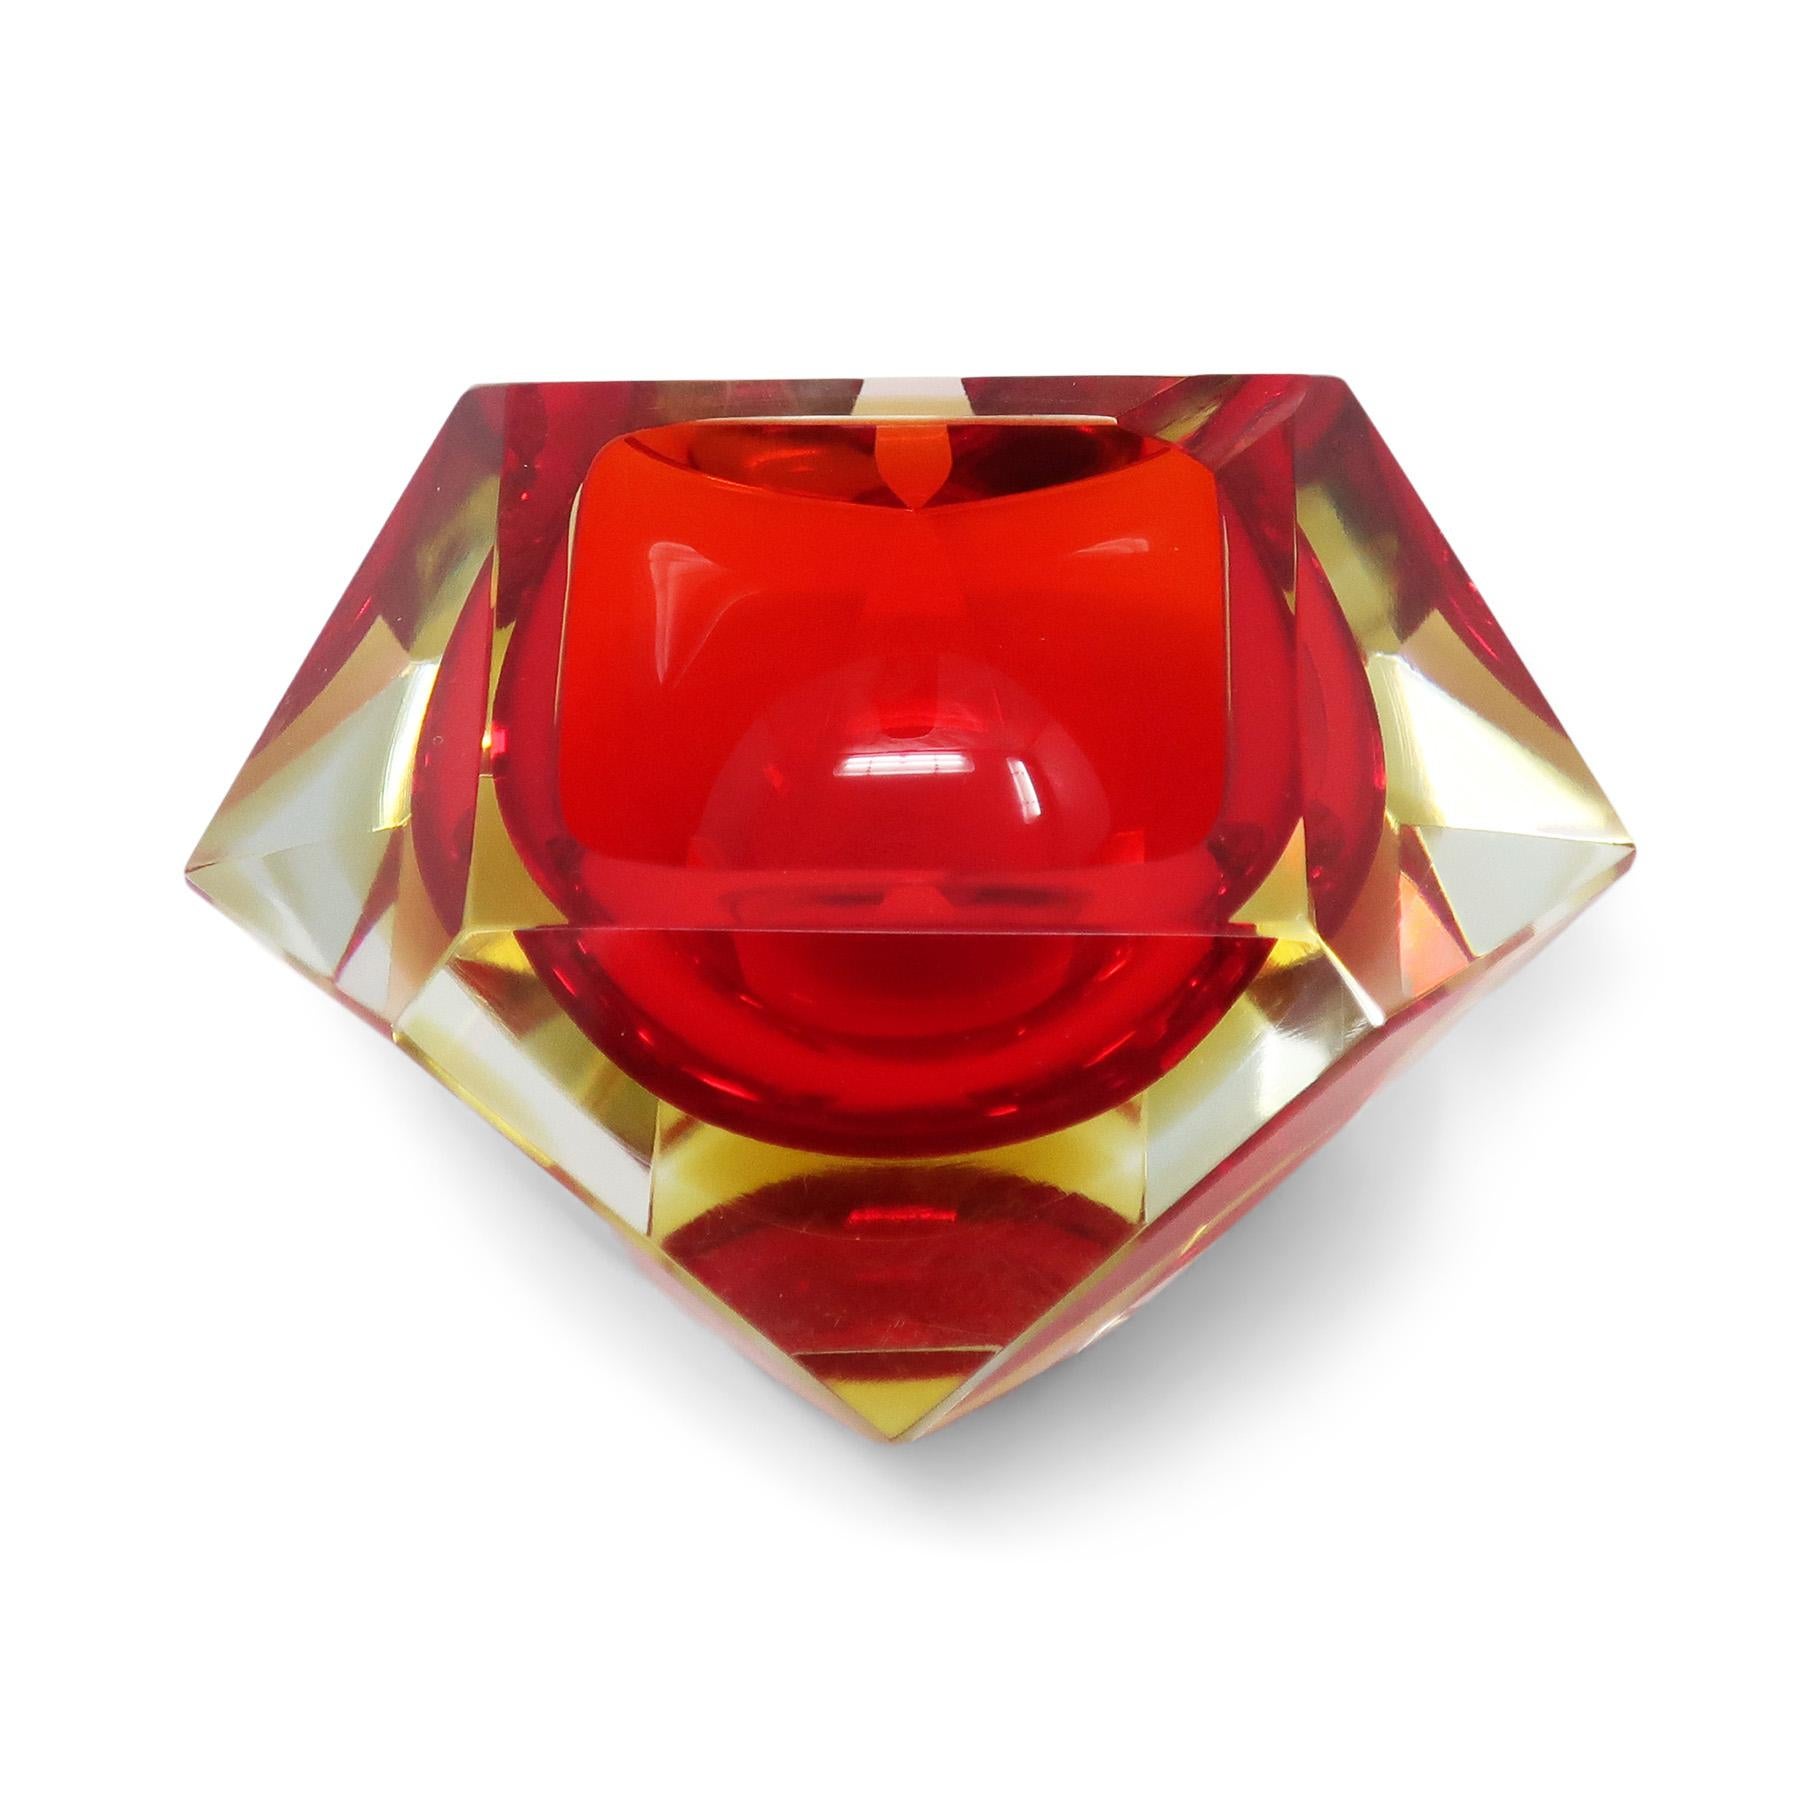 Glass Vintage Red and Yellow Faceted Sommerso Ashtray 